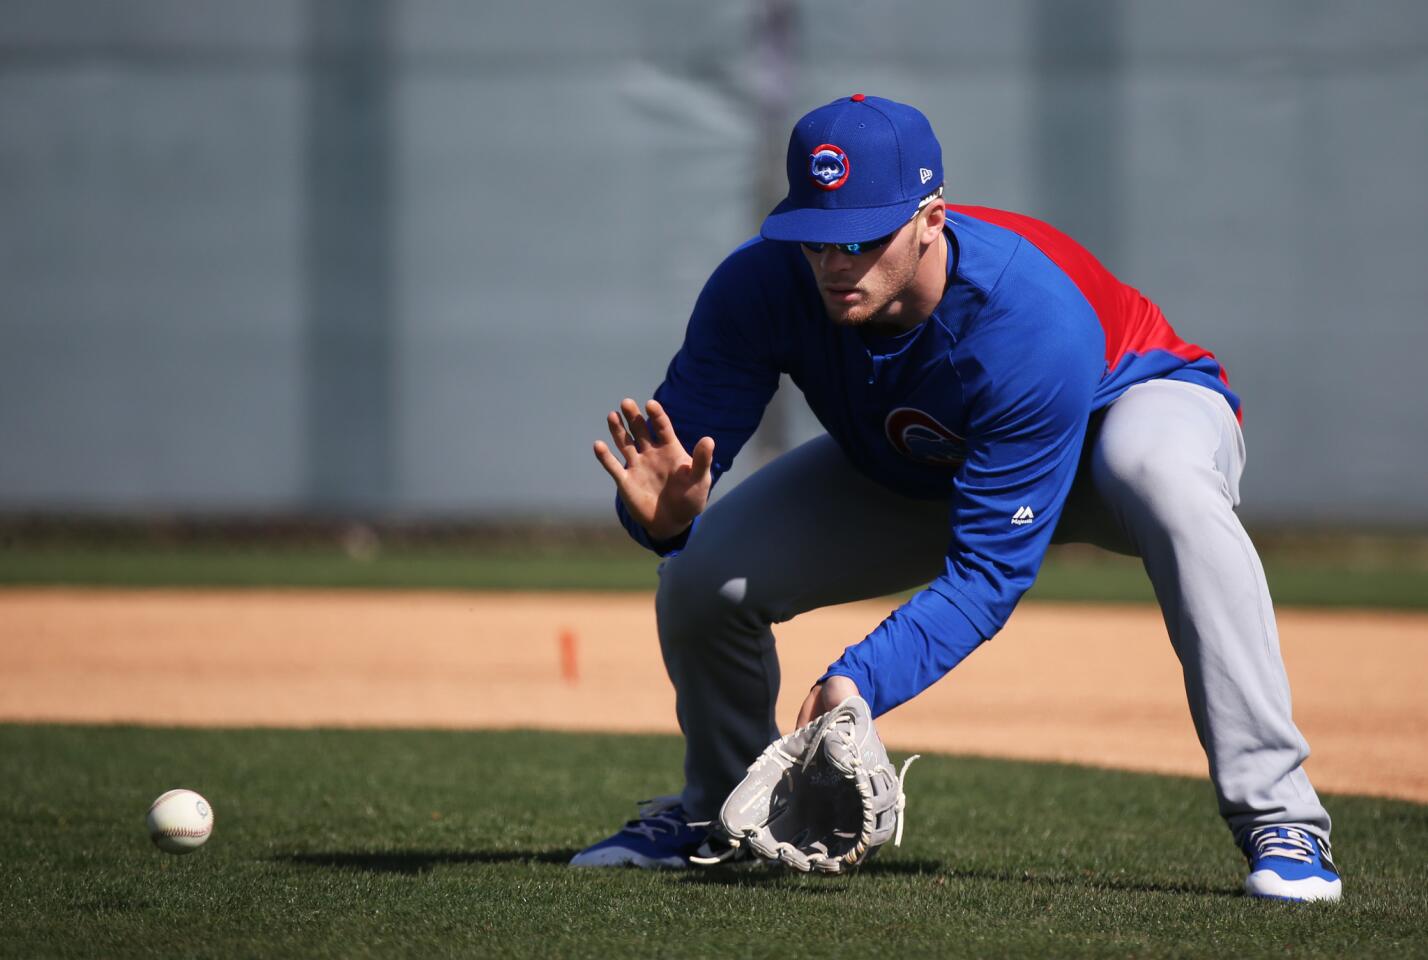 ct-cubs-arrive-at-spring-training-photos-008